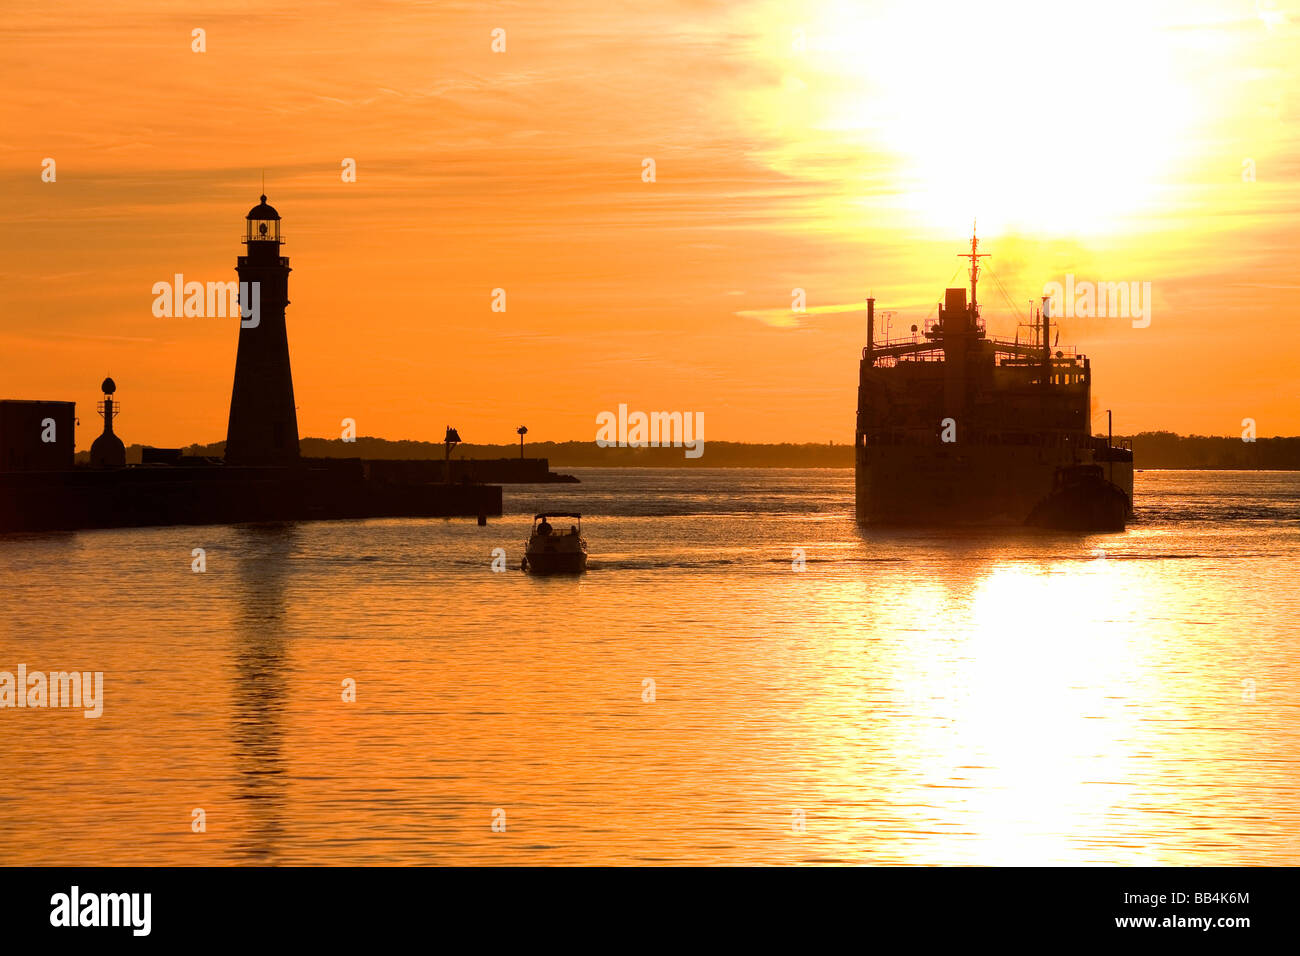 Buffalo Lighthouse and Cement Carrier in Buffalo Port at sunset; Buffalo, New York State, USA Stock Photo